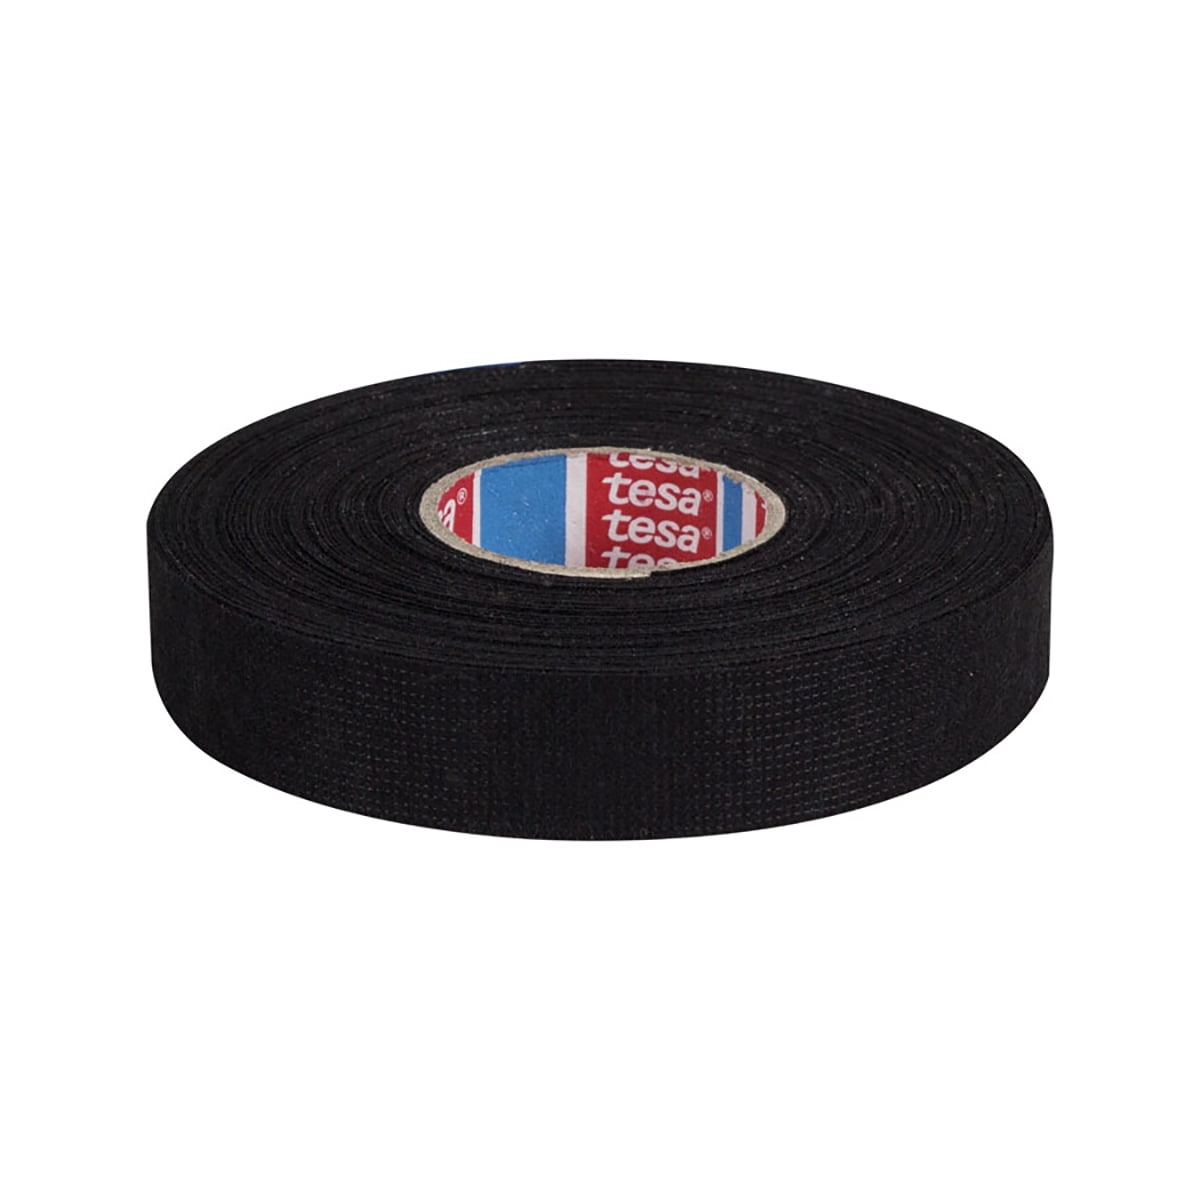 Picture of InstallBay by Metra IB51608 0.75 in. 25 m Tesa Interior Harness Tape